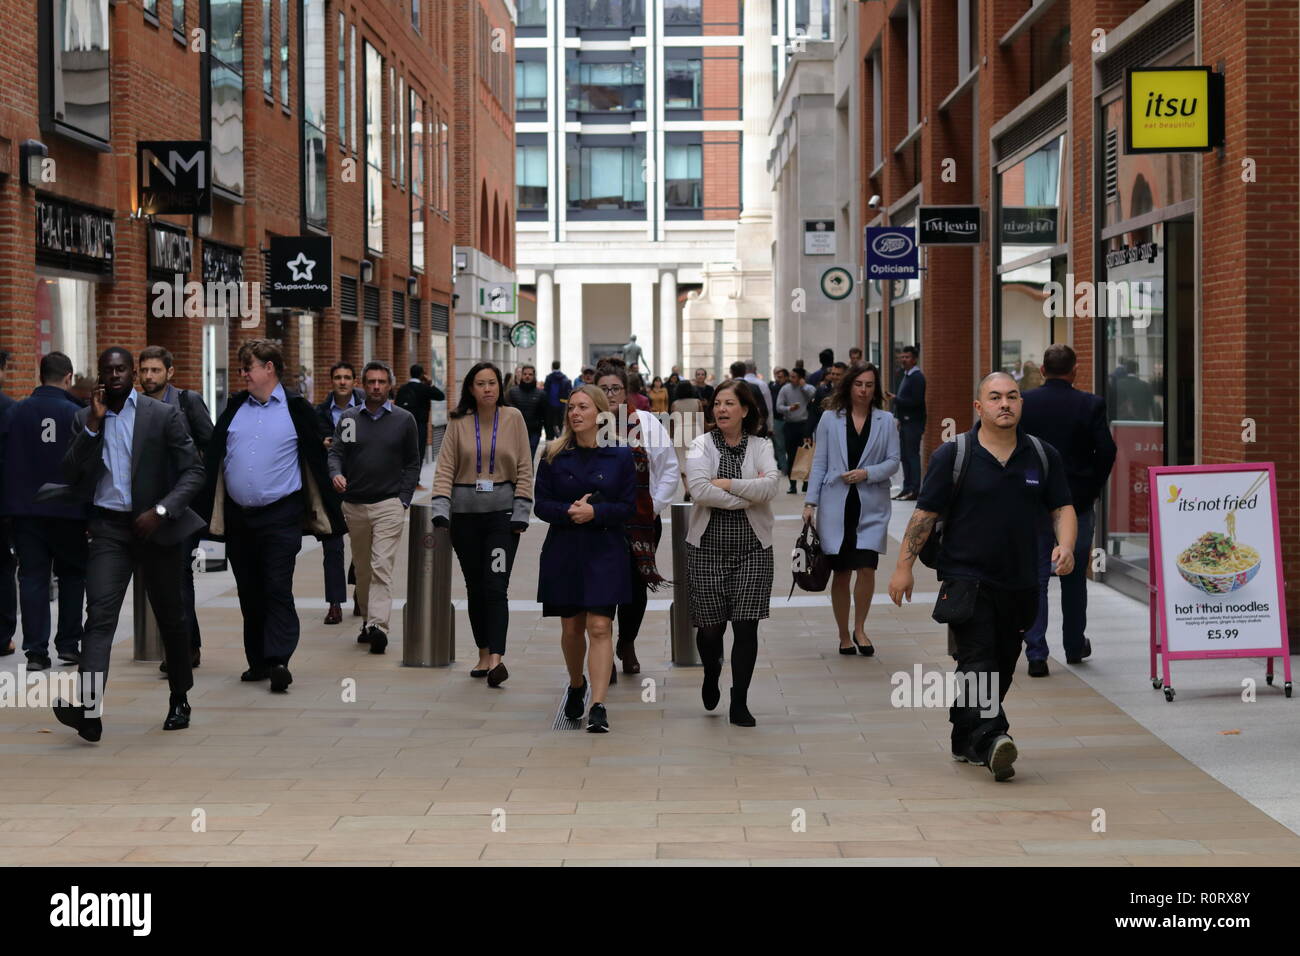 Lunch time in London, busy people rushing for lunch and moving in different directions. London energy Stock Photo